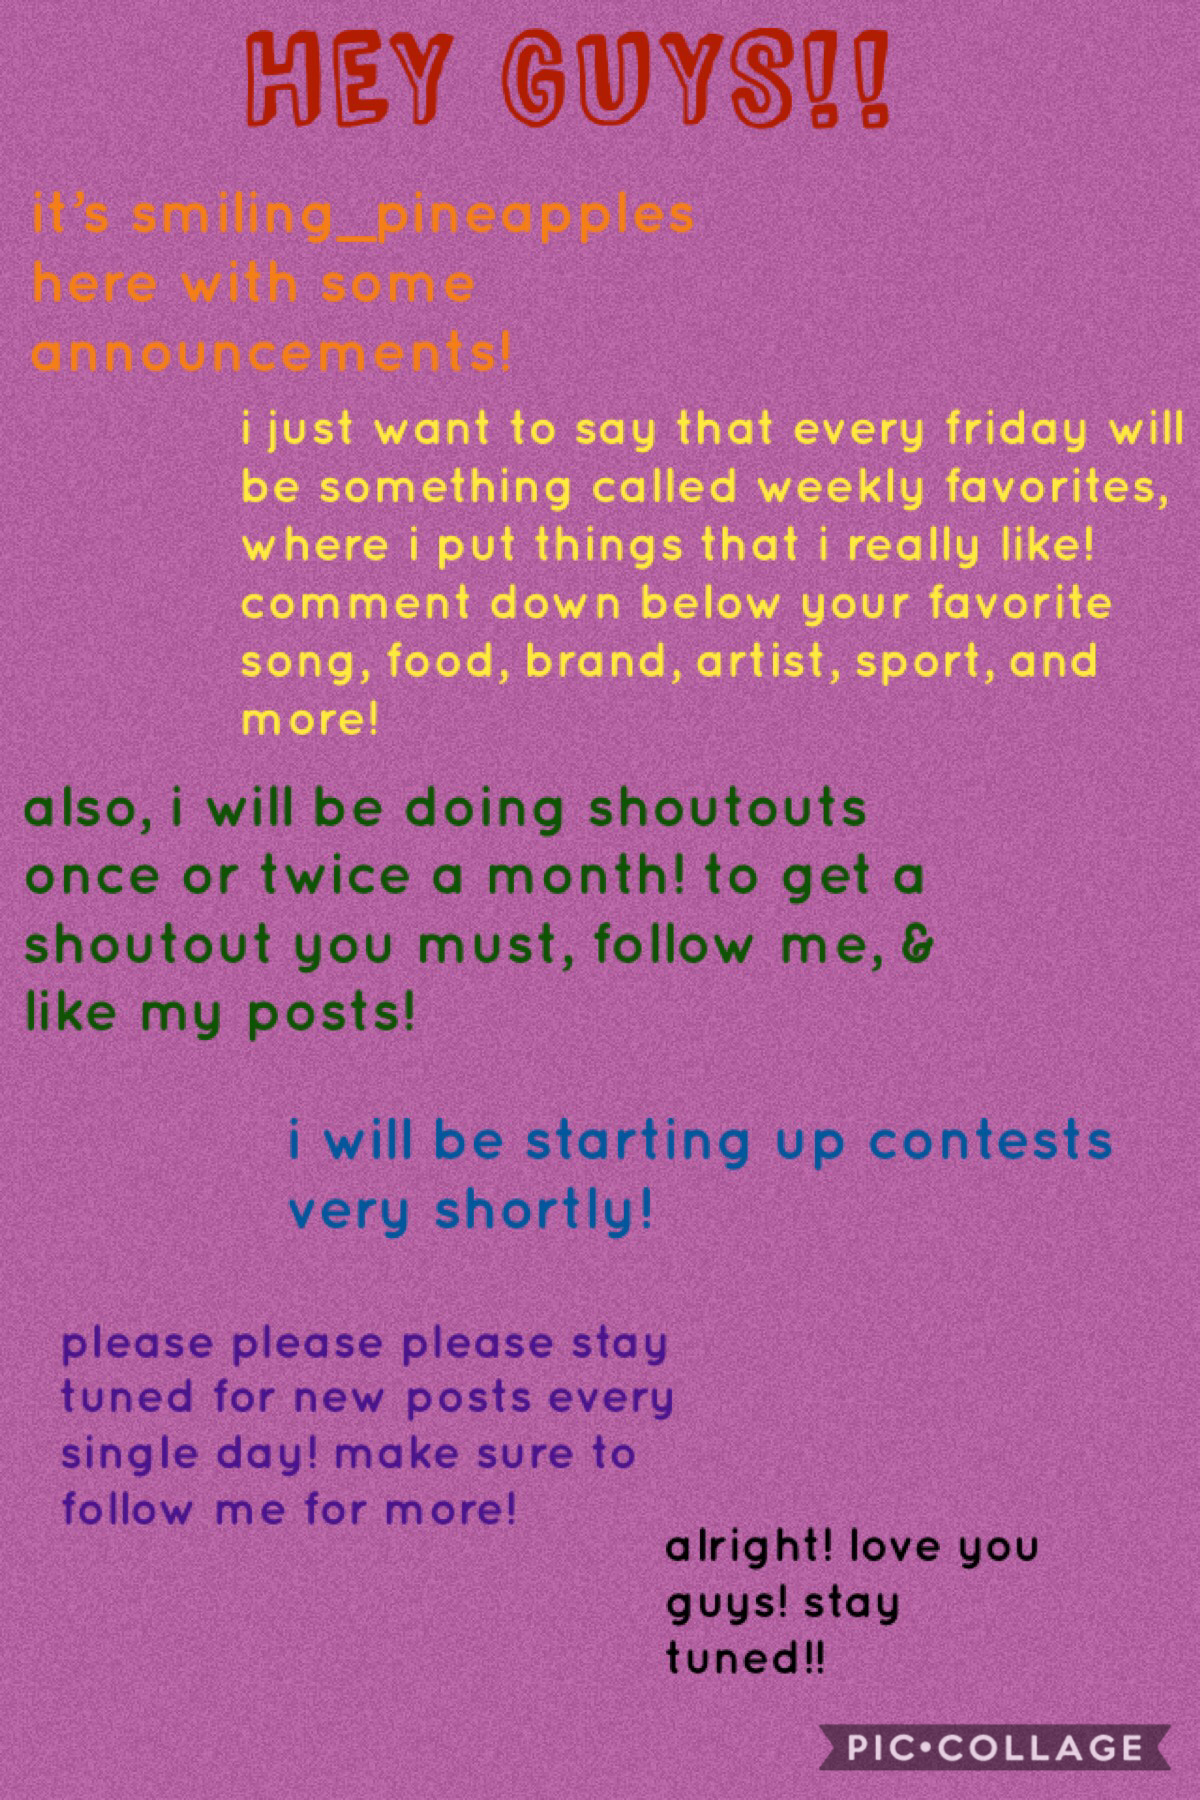 just some announcements! 